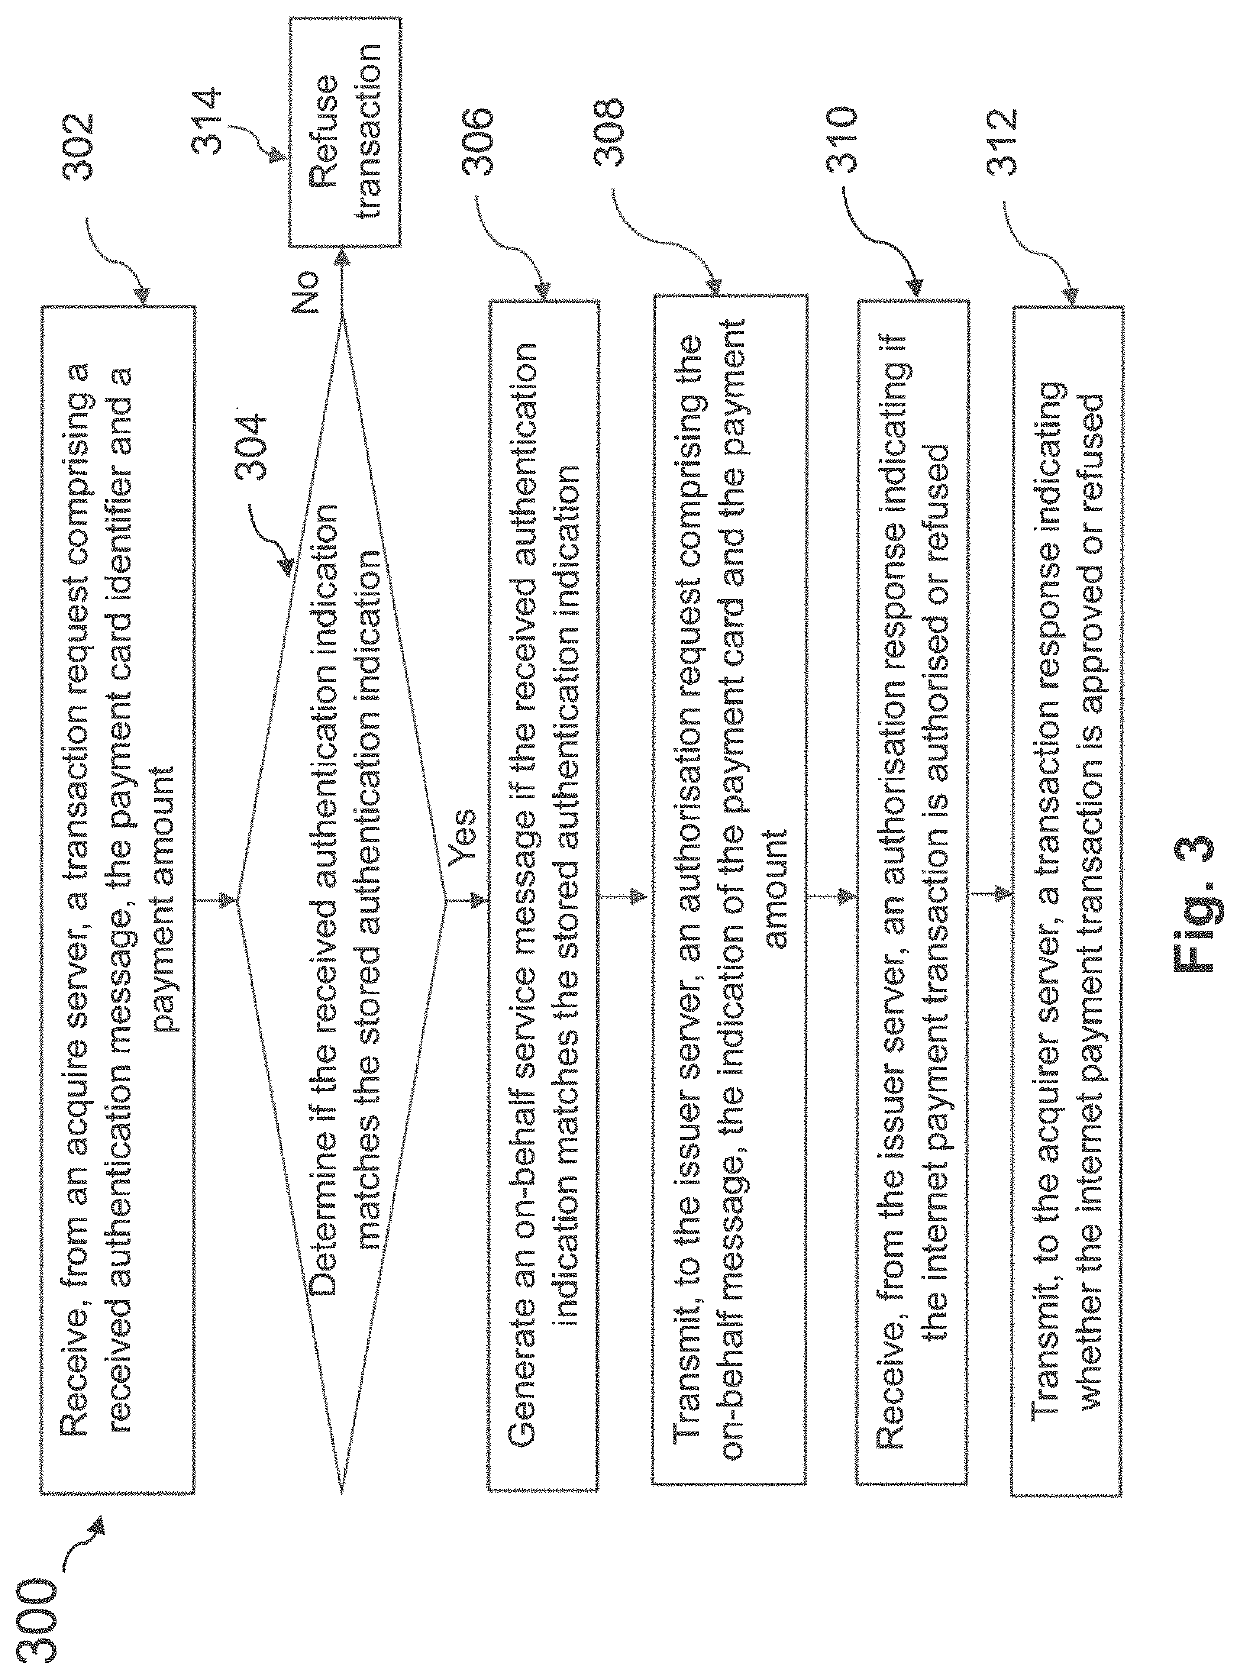 Computer system and computer-implemented method for processing an electronic commerce transaction using a network